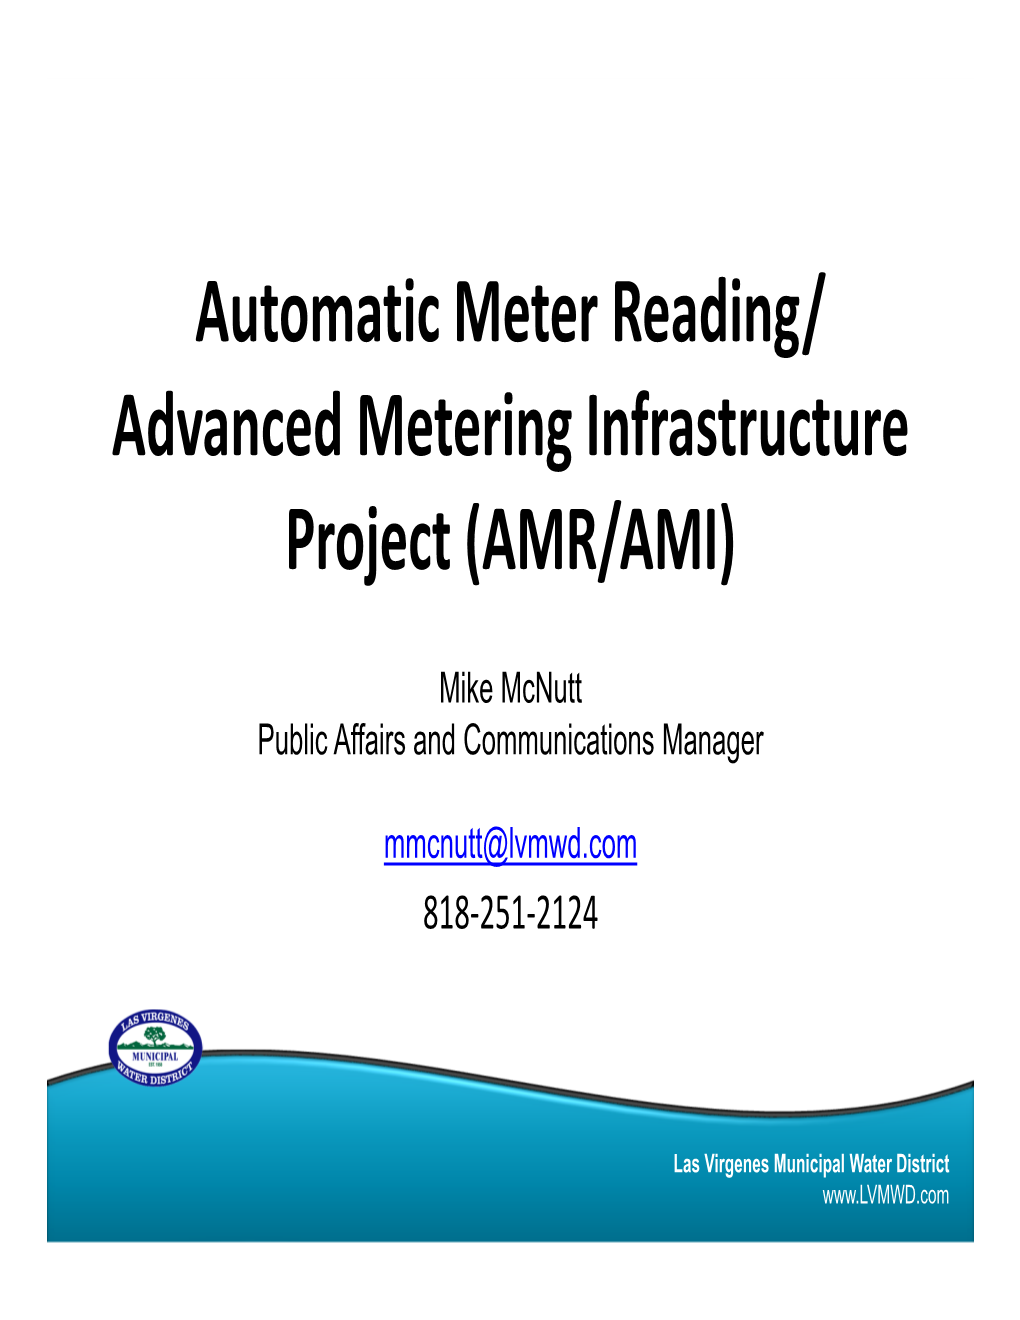 Automatic Meter Reading/ Advanced Metering Infrastructure Project (AMR/AMI)